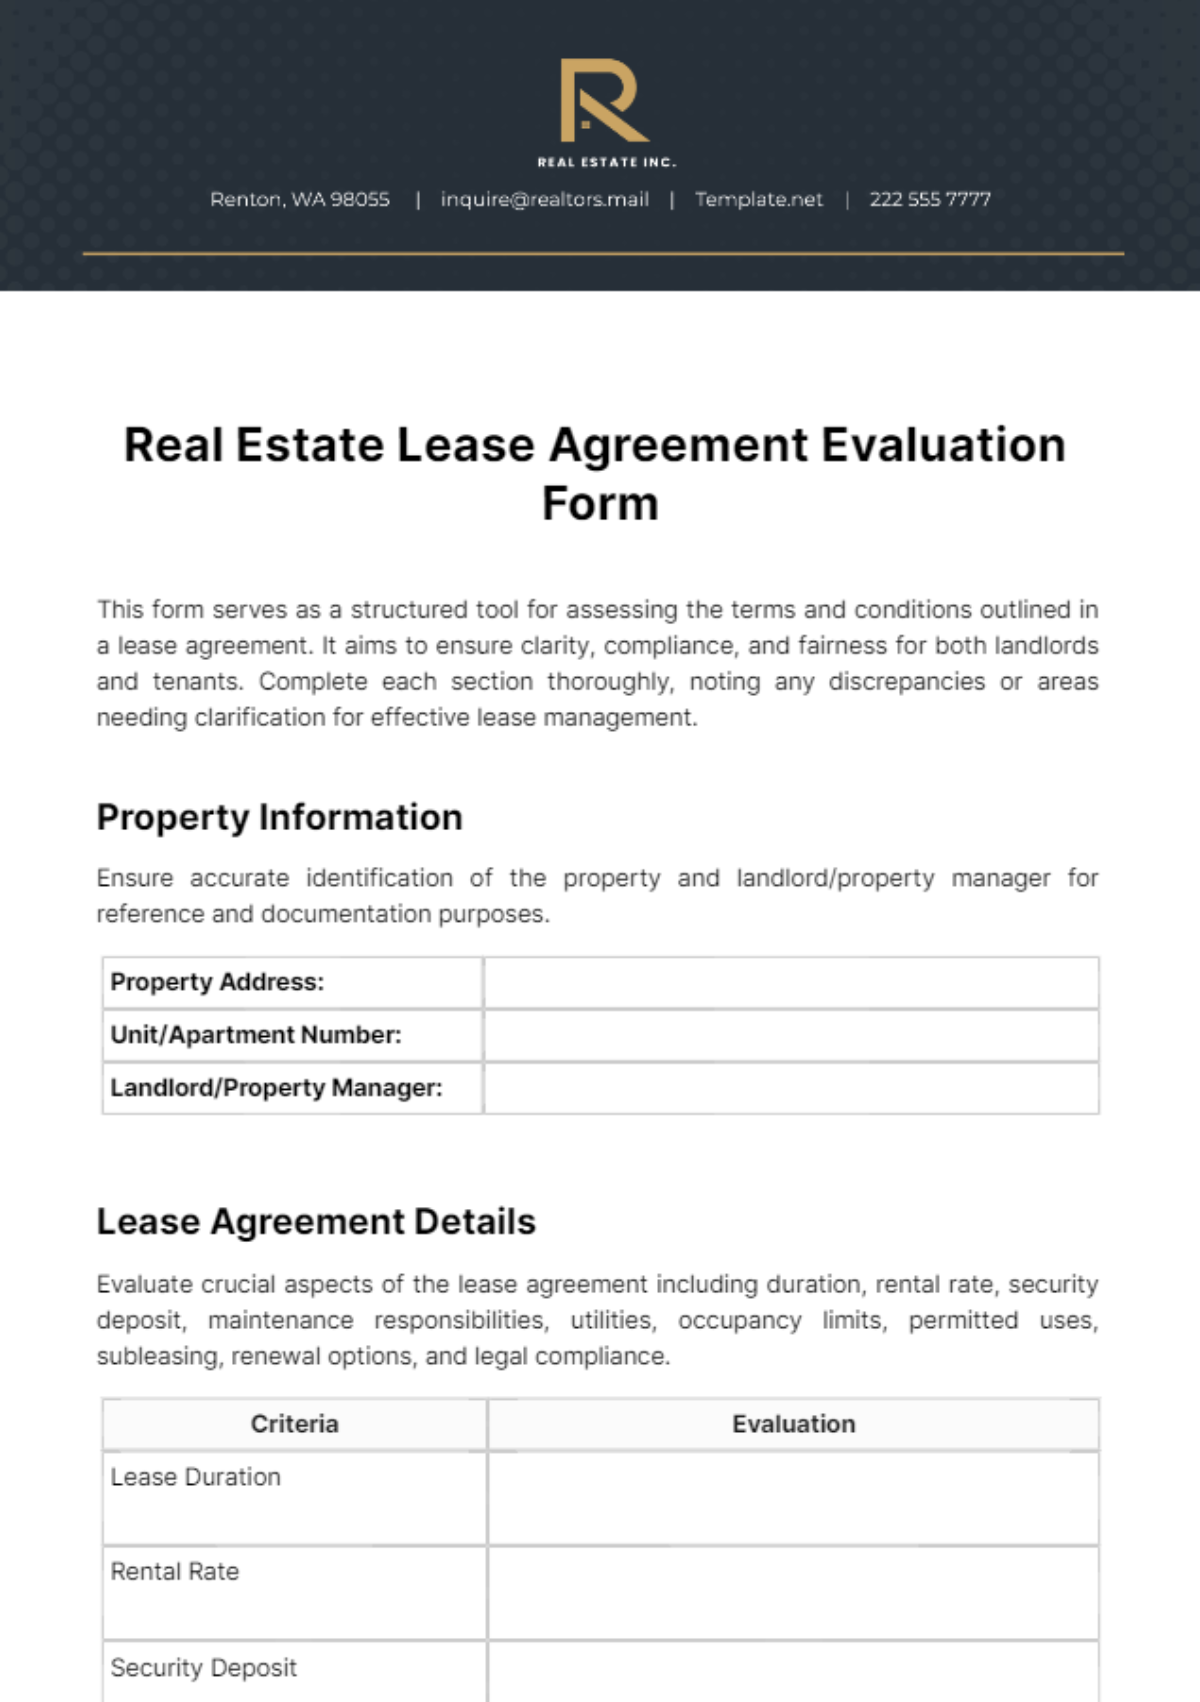 Free Real Estate Lease Agreement Evaluation Form Template